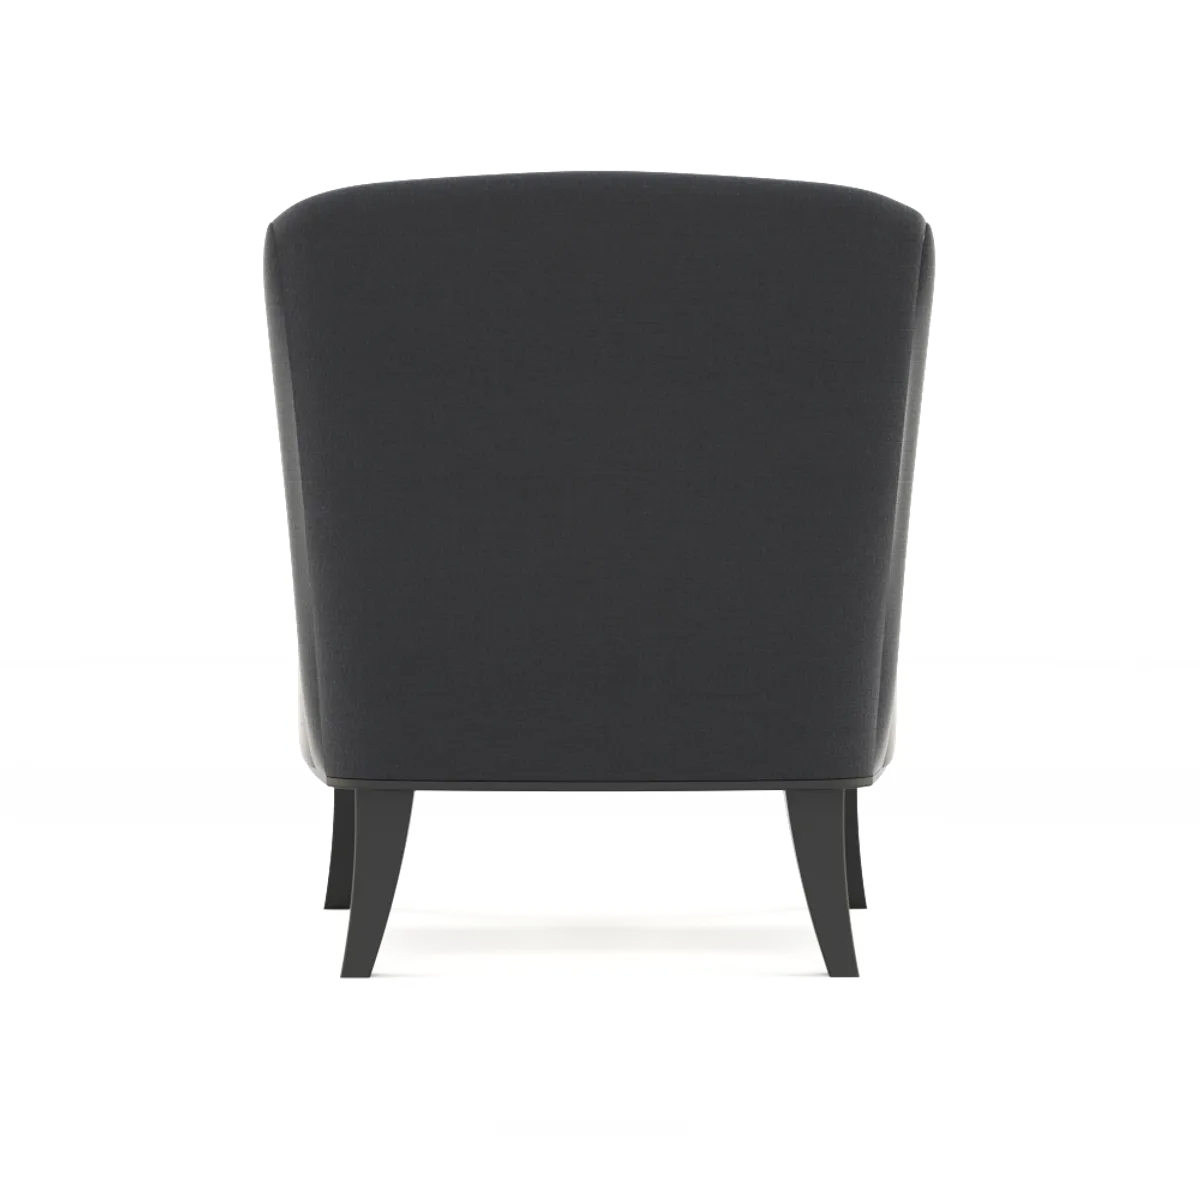 Curzon Chair Bespoke Exclusively By Inside Out Contracts 028